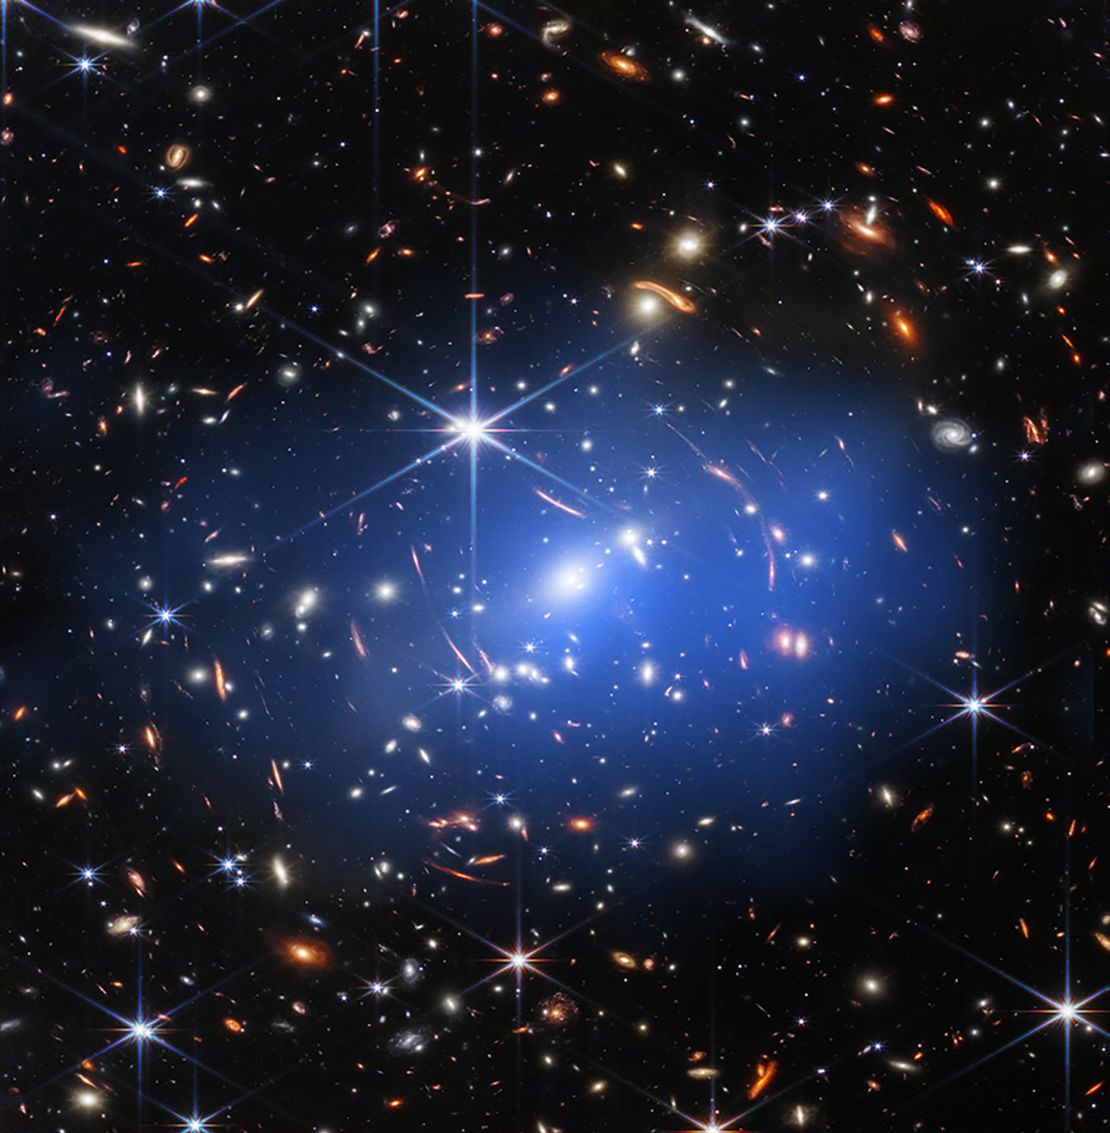 Webb's deep view of distant galaxies now sports the blue haze of X-rays from Chandra's data.